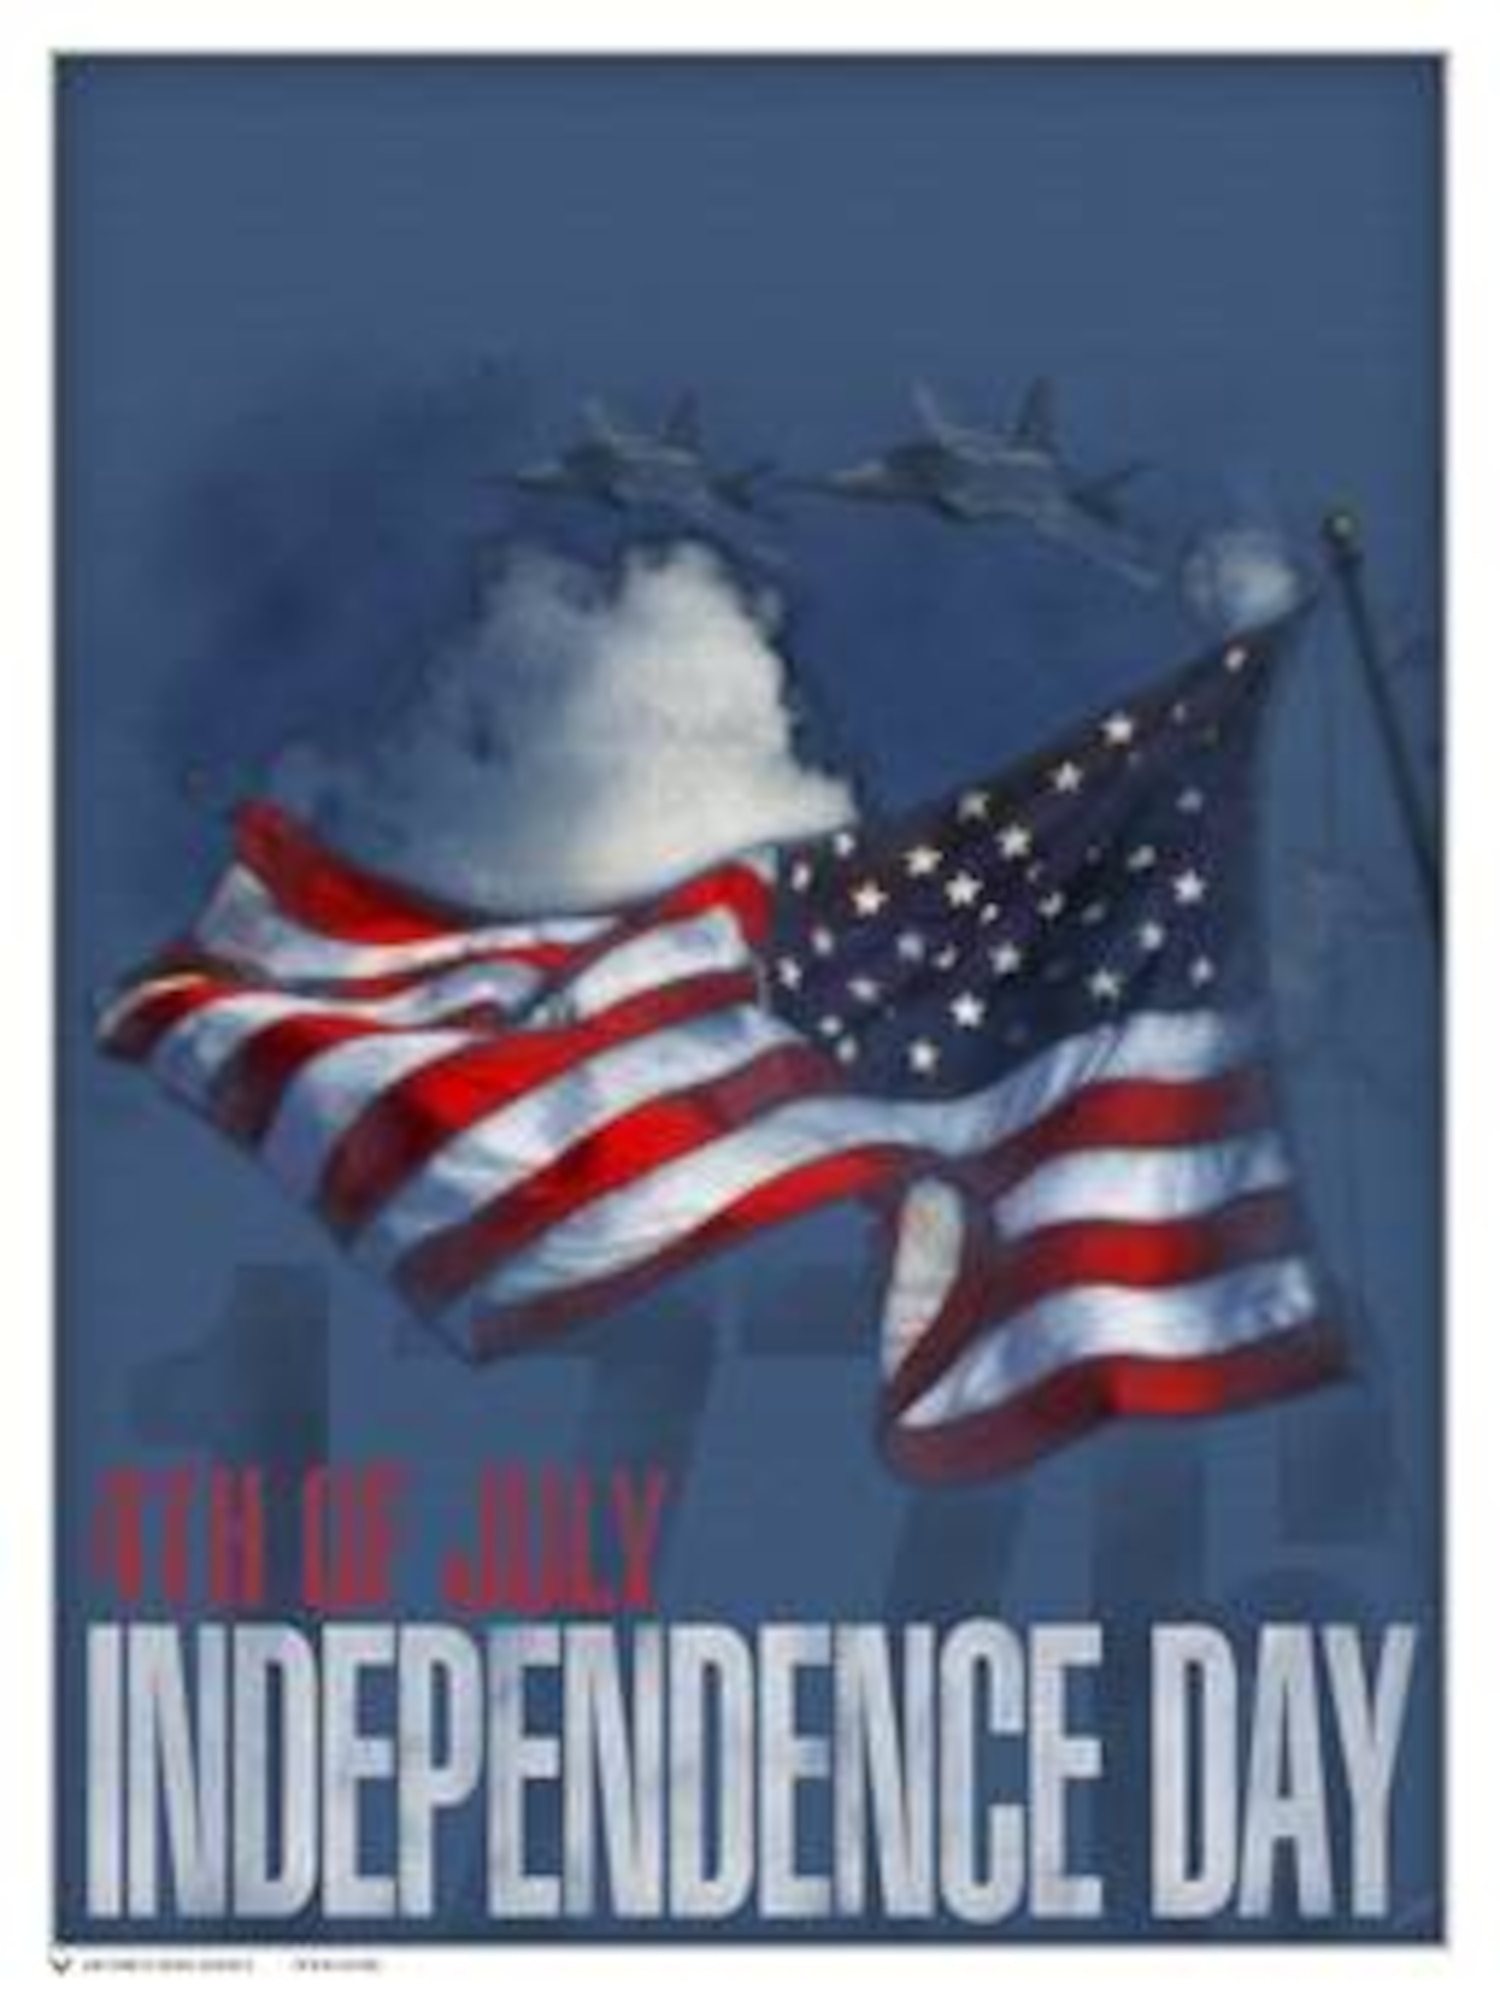 Independence Day Poster (Color).  This poster is 7.5x10 inches @ 300 ppi and was created by Patrick Harris of the Air Force News Agency.  Air Force Link does not provide printed posters but assistance can be provided in acquiring posters through your servicing DAPS. A PDF version for printing on office printers is also available. Requests can be made to afgraphics@dma.mil. Please specify the title and number.